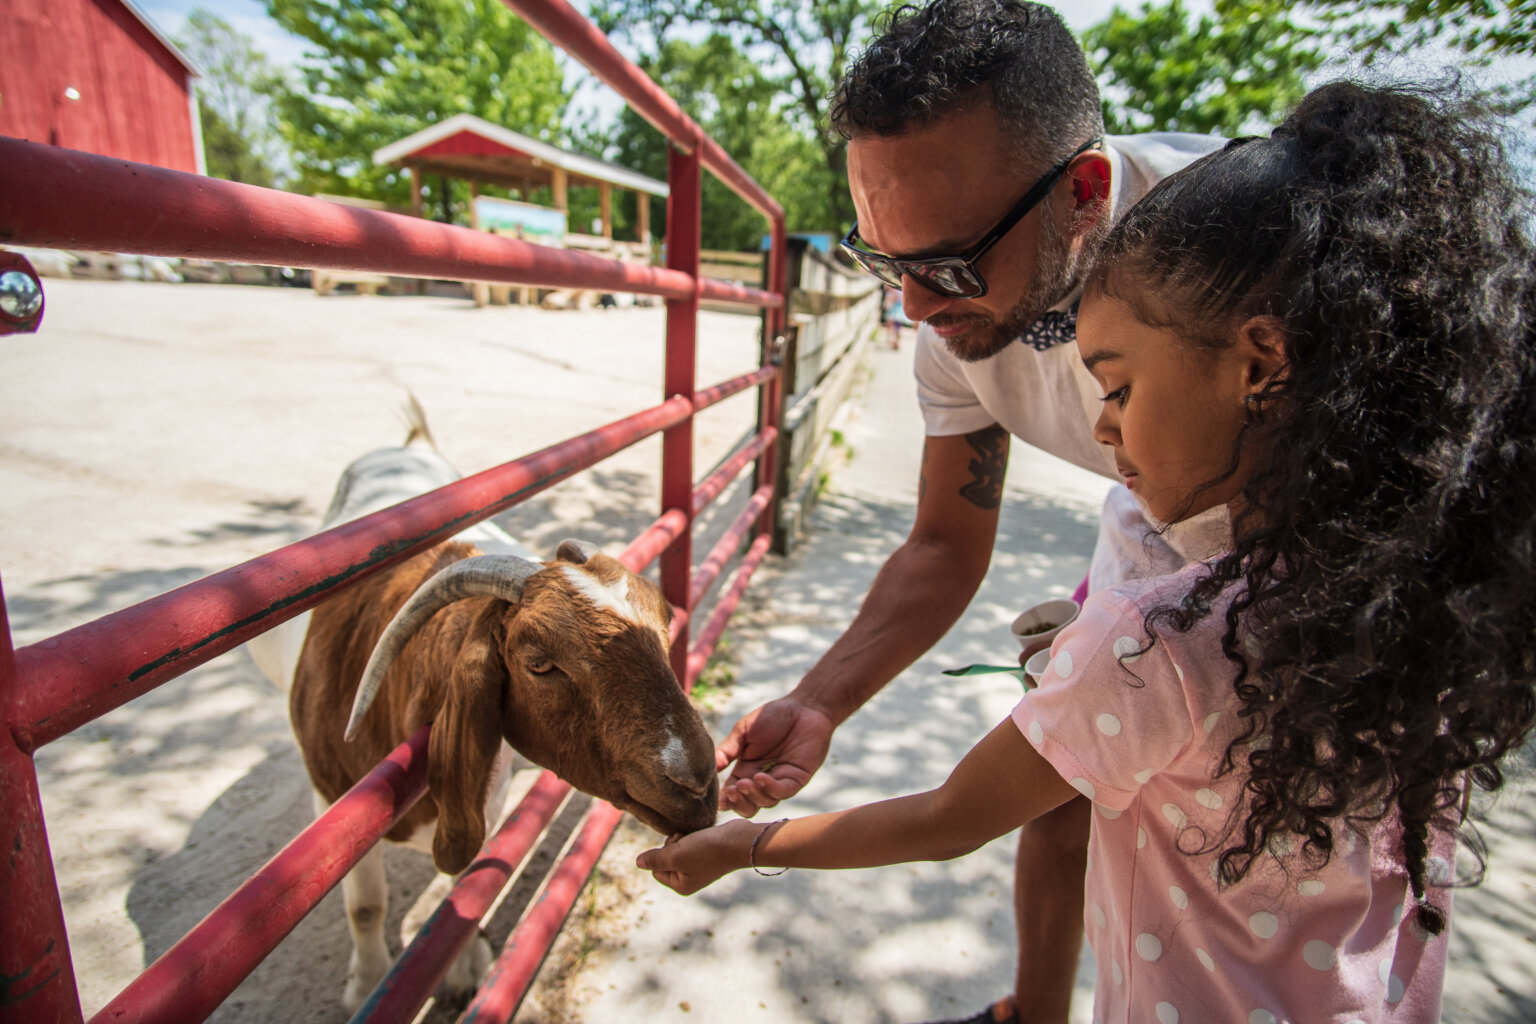 father and daughter feeding a goat at the petting zoo